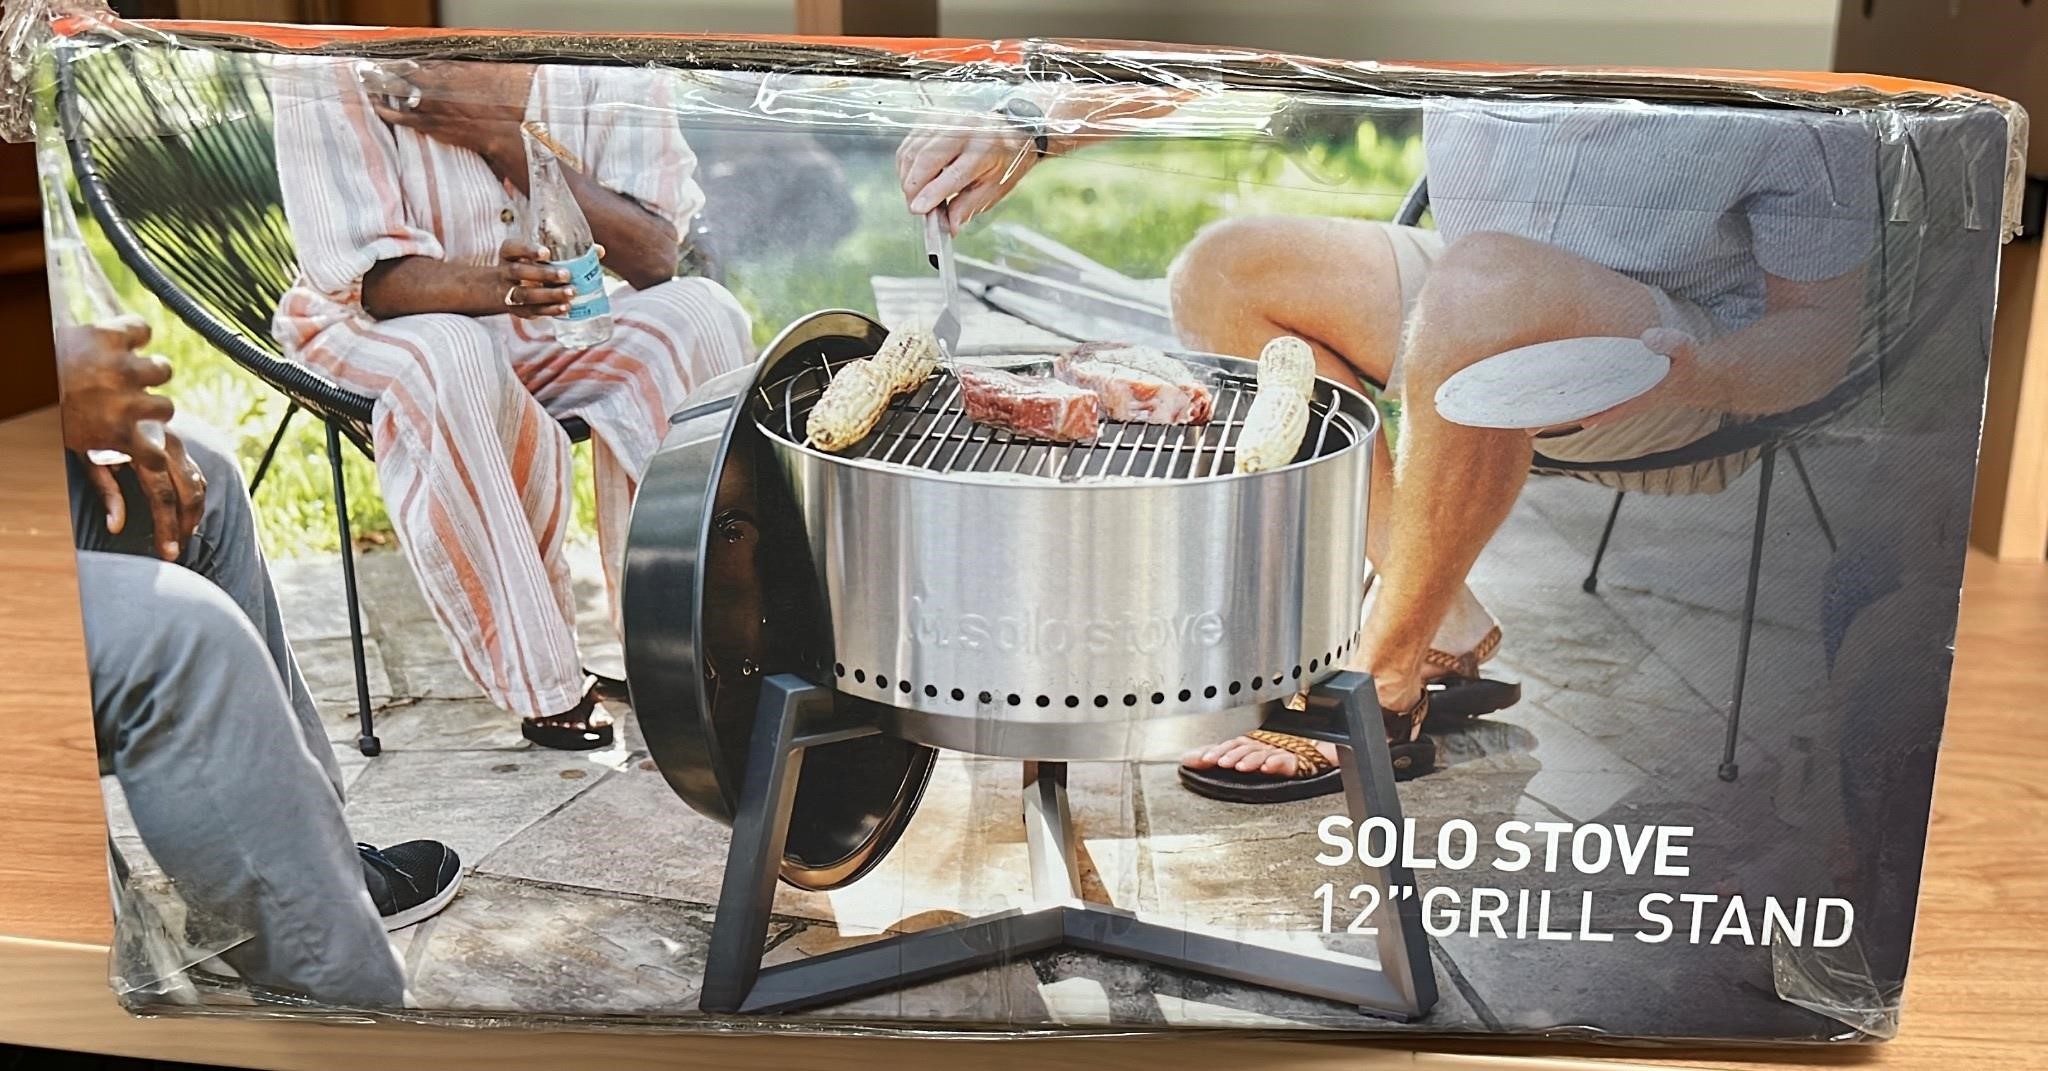 Solo Stove 12” Grill Stand